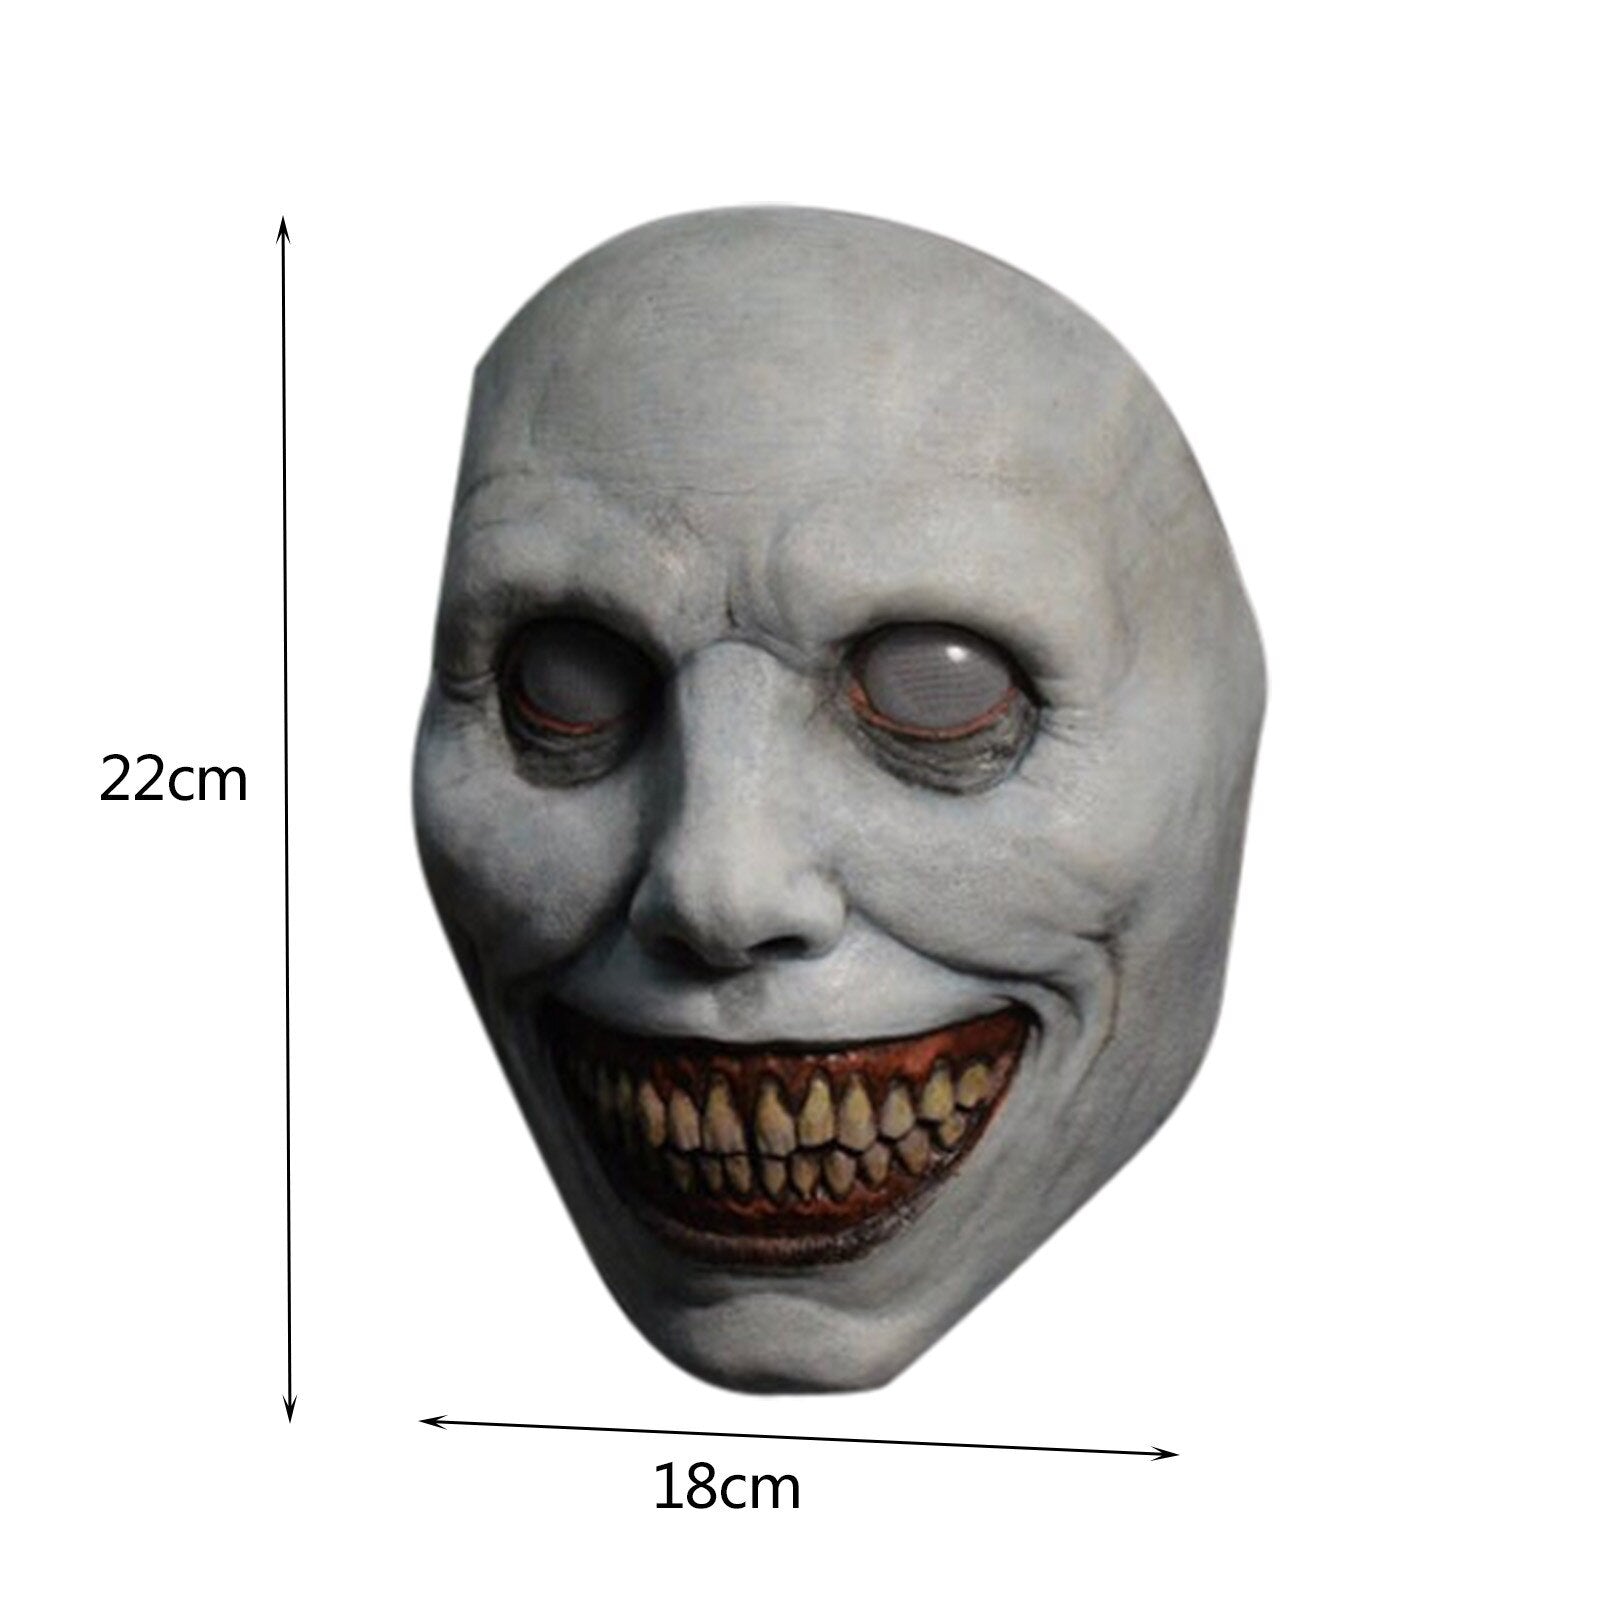 Creepy Halloween Mask Smiling Demons Horror Face Masks The Evil Cosplay Props Headwear Dress Up Party Clothing Accessories Gifts